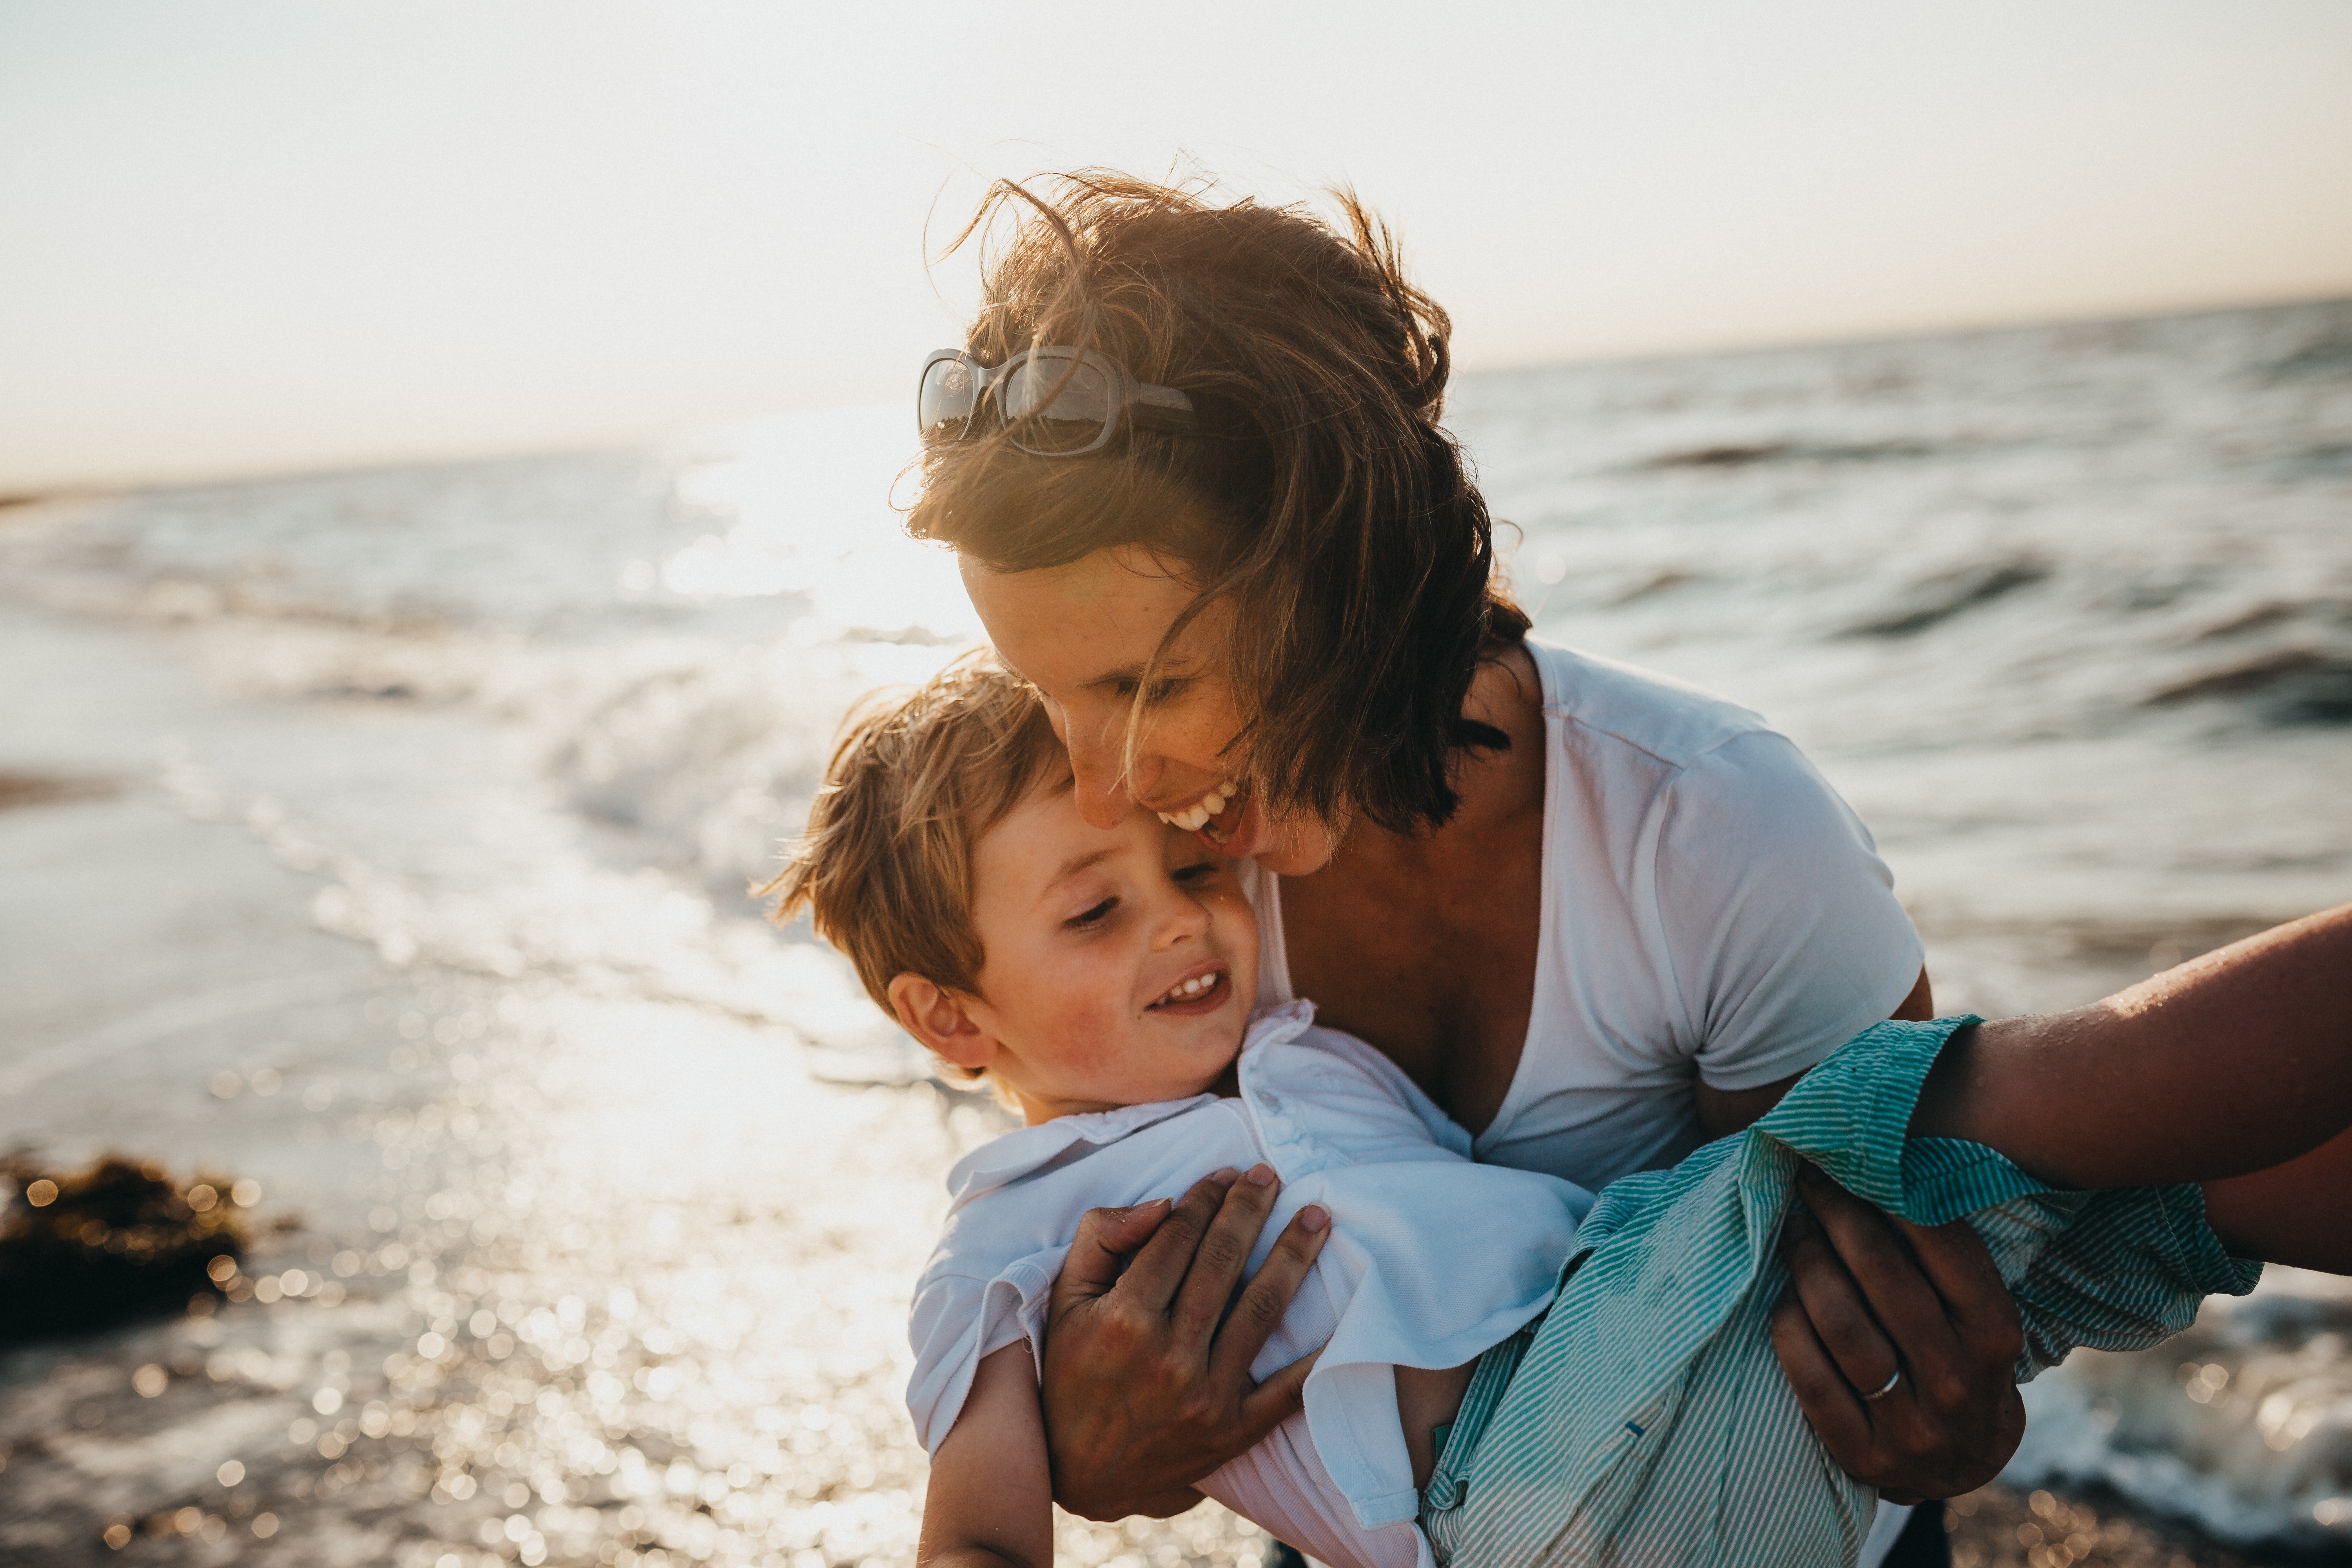 Danny's mom was a single mother and she raised him on her own. | Source: Unsplash